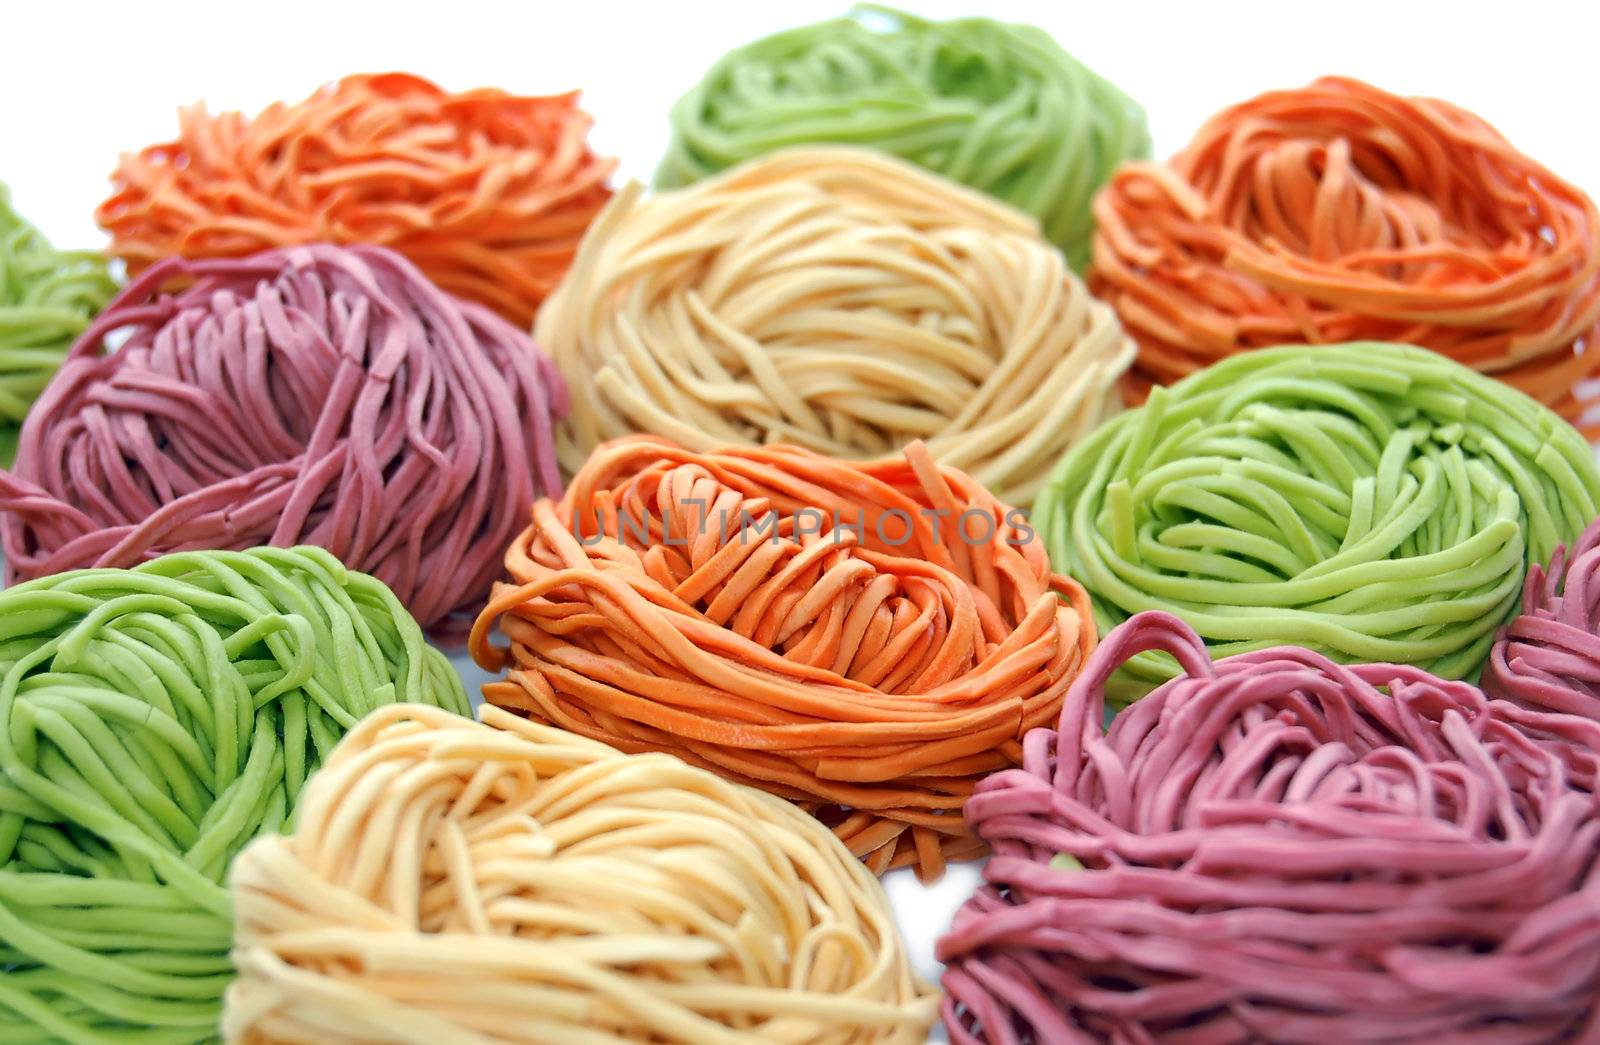 colored pasta or colored noodles redy for cooking